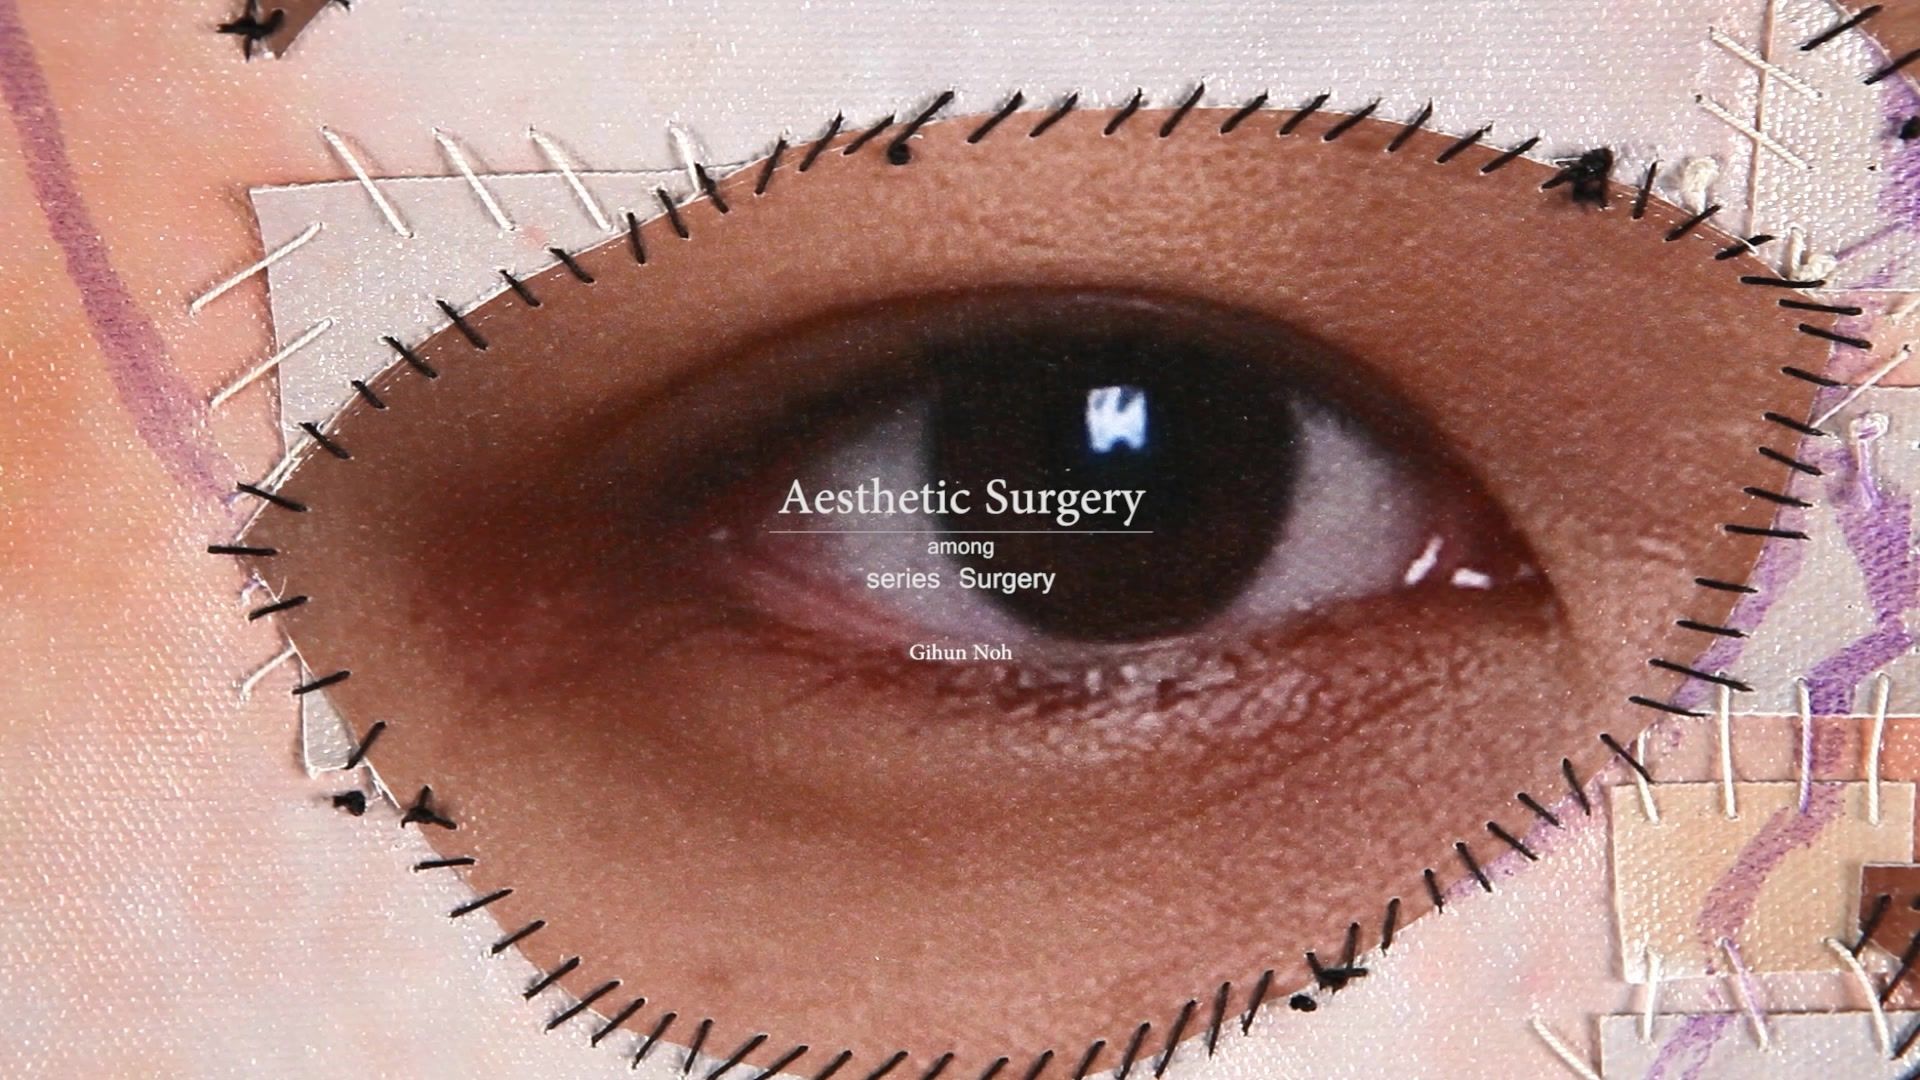 Aesthetic Surgery series Aesthetic Surgery, DV with Sound, 15min 31sec, 2012